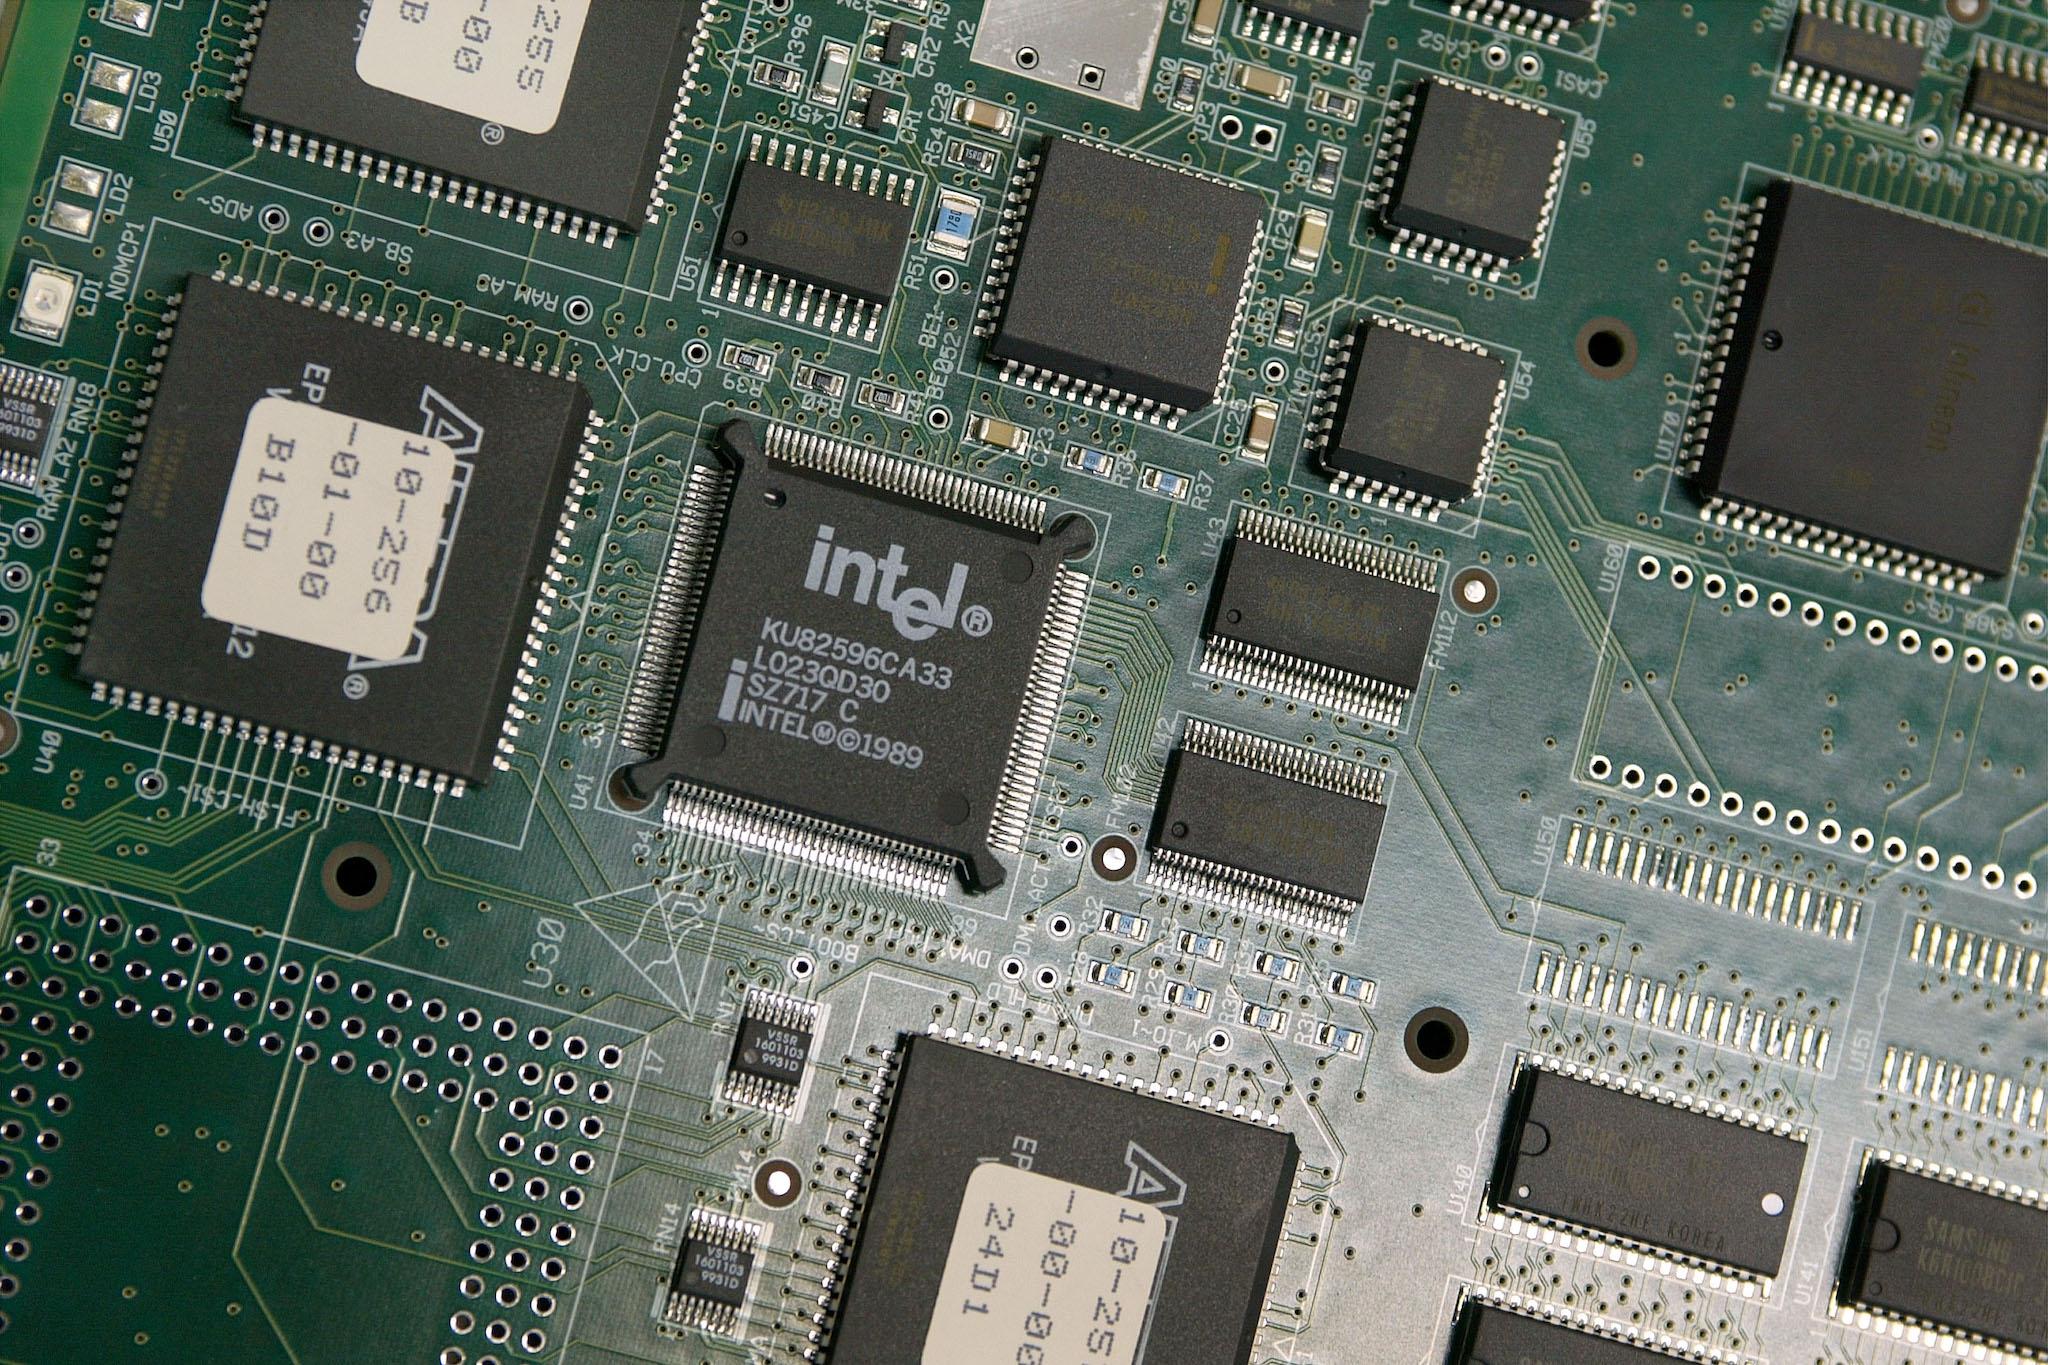 An Intel chip is seen in a circuit board being built at an ECI Telecom high-tech plant January 15, 2003 in Petah Tikva which is located in central Israel